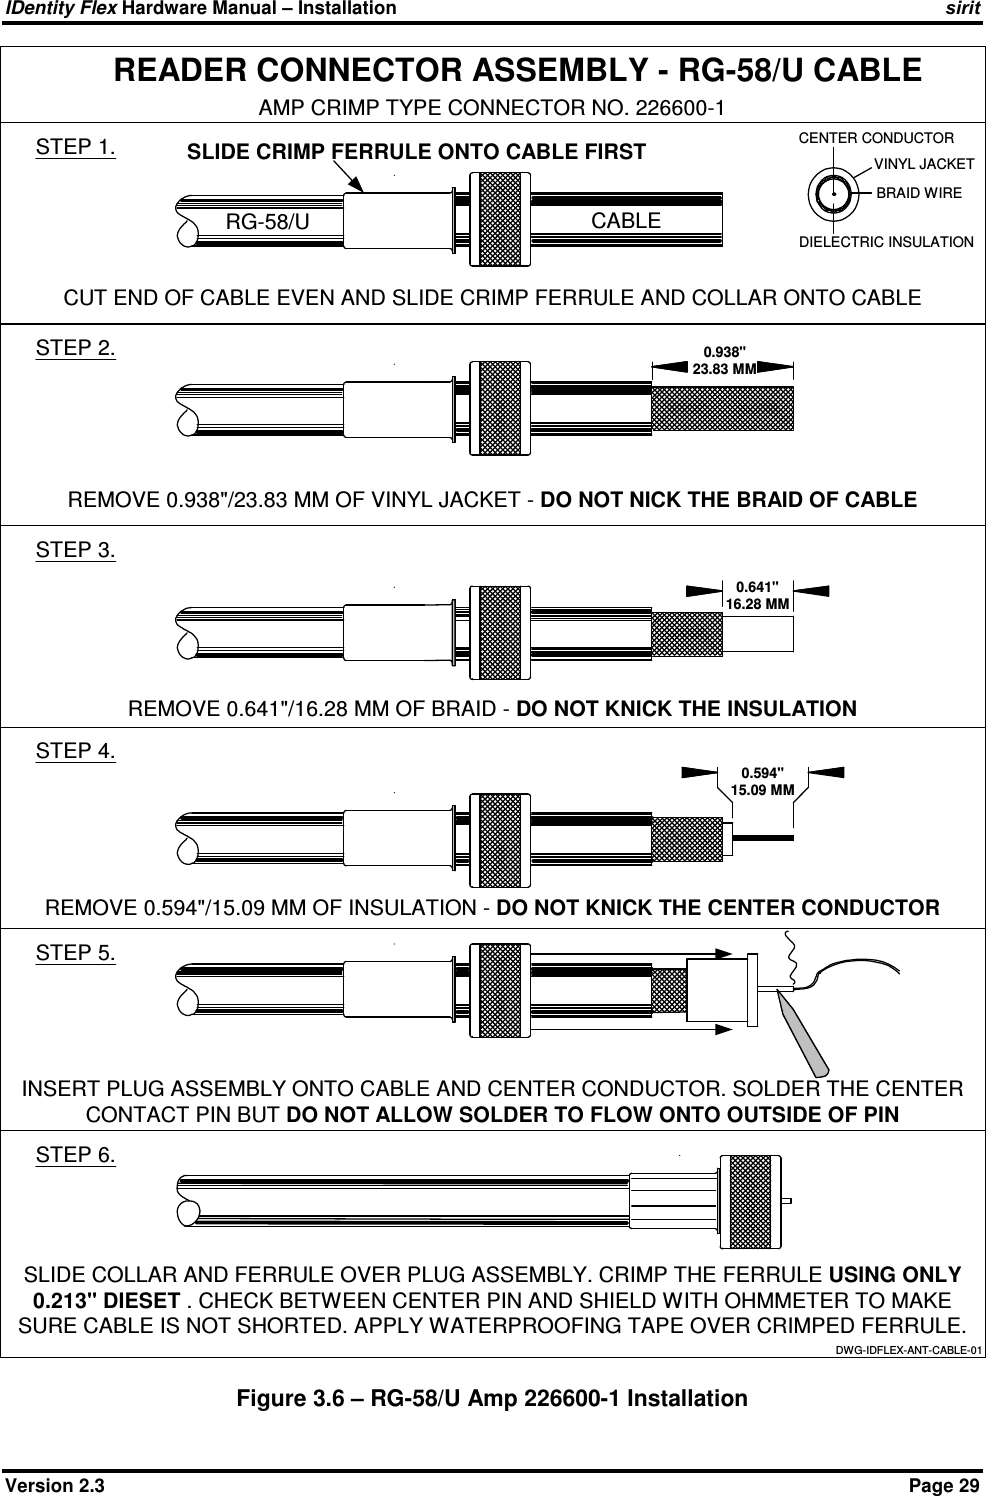 IDentity Flex Hardware Manual – Installation   sirit Version 2.3    Page 29 Figure 3.6 – RG-58/U Amp 226600-1 Installation READER CONNECTOR ASSEMBLY - RG-58/U CABLESTEP 1.RG-58/U CABLECUT END OF CABLE EVEN AND SLIDE CRIMP FERRULE AND COLLAR ONTO CABLESTEP 2.AMP CRIMP TYPE CONNECTOR NO. 226600-1REMOVE 0.938&quot;/23.83 MM OF VINYL JACKET - DO NOT NICK THE BRAID OF CABLESTEP 3.STEP 4.STEP 5.STEP 6.0.938&quot;23.83 MMREMOVE 0.641&quot;/16.28 MM OF BRAID - DO NOT KNICK THE INSULATIONREMOVE 0.594&quot;/15.09 MM OF INSULATION - DO NOT KNICK THE CENTER CONDUCTORINSERT PLUG ASSEMBLY ONTO CABLE AND CENTER CONDUCTOR. SOLDER THE CENTERCONTACT PIN BUT DO NOT ALLOW SOLDER TO FLOW ONTO OUTSIDE OF PIN0.641&quot;16.28 MM0.594&quot;15.09 MMSLIDE COLLAR AND FERRULE OVER PLUG ASSEMBLY. CRIMP THE FERRULE USING ONLY0.213&quot; DIESET . CHECK BETWEEN CENTER PIN AND SHIELD WITH OHMMETER TO MAKESURE CABLE IS NOT SHORTED. APPLY WATERPROOFING TAPE OVER CRIMPED FERRULE.VINYL JACKETBRAID WIREDIELECTRIC INSULATIONCENTER CONDUCTORDWG-IDFLEX-ANT-CABLE-01SLIDE CRIMP FERRULE ONTO CABLE FIRST 